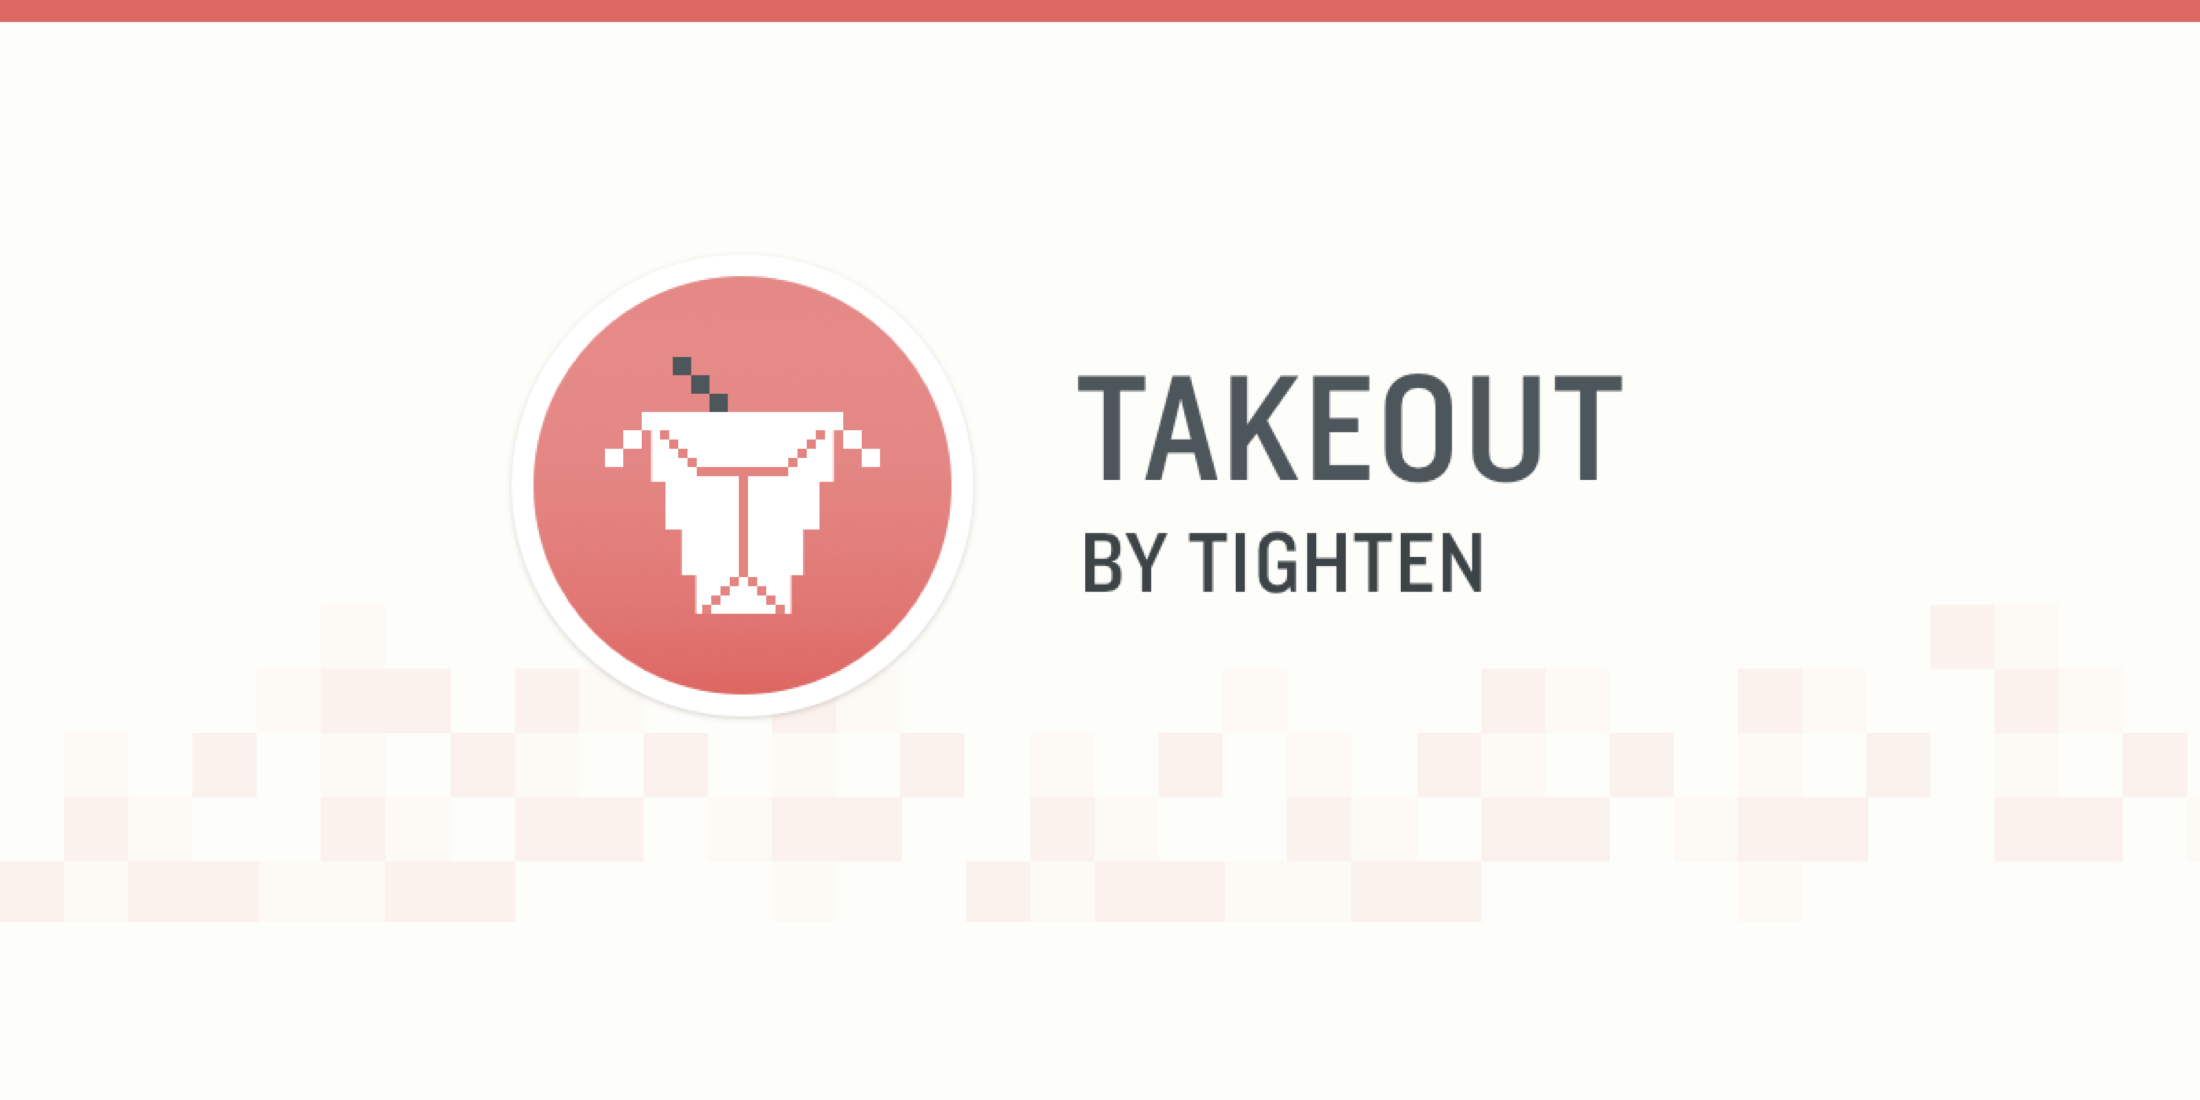 Takeout by Tighten image